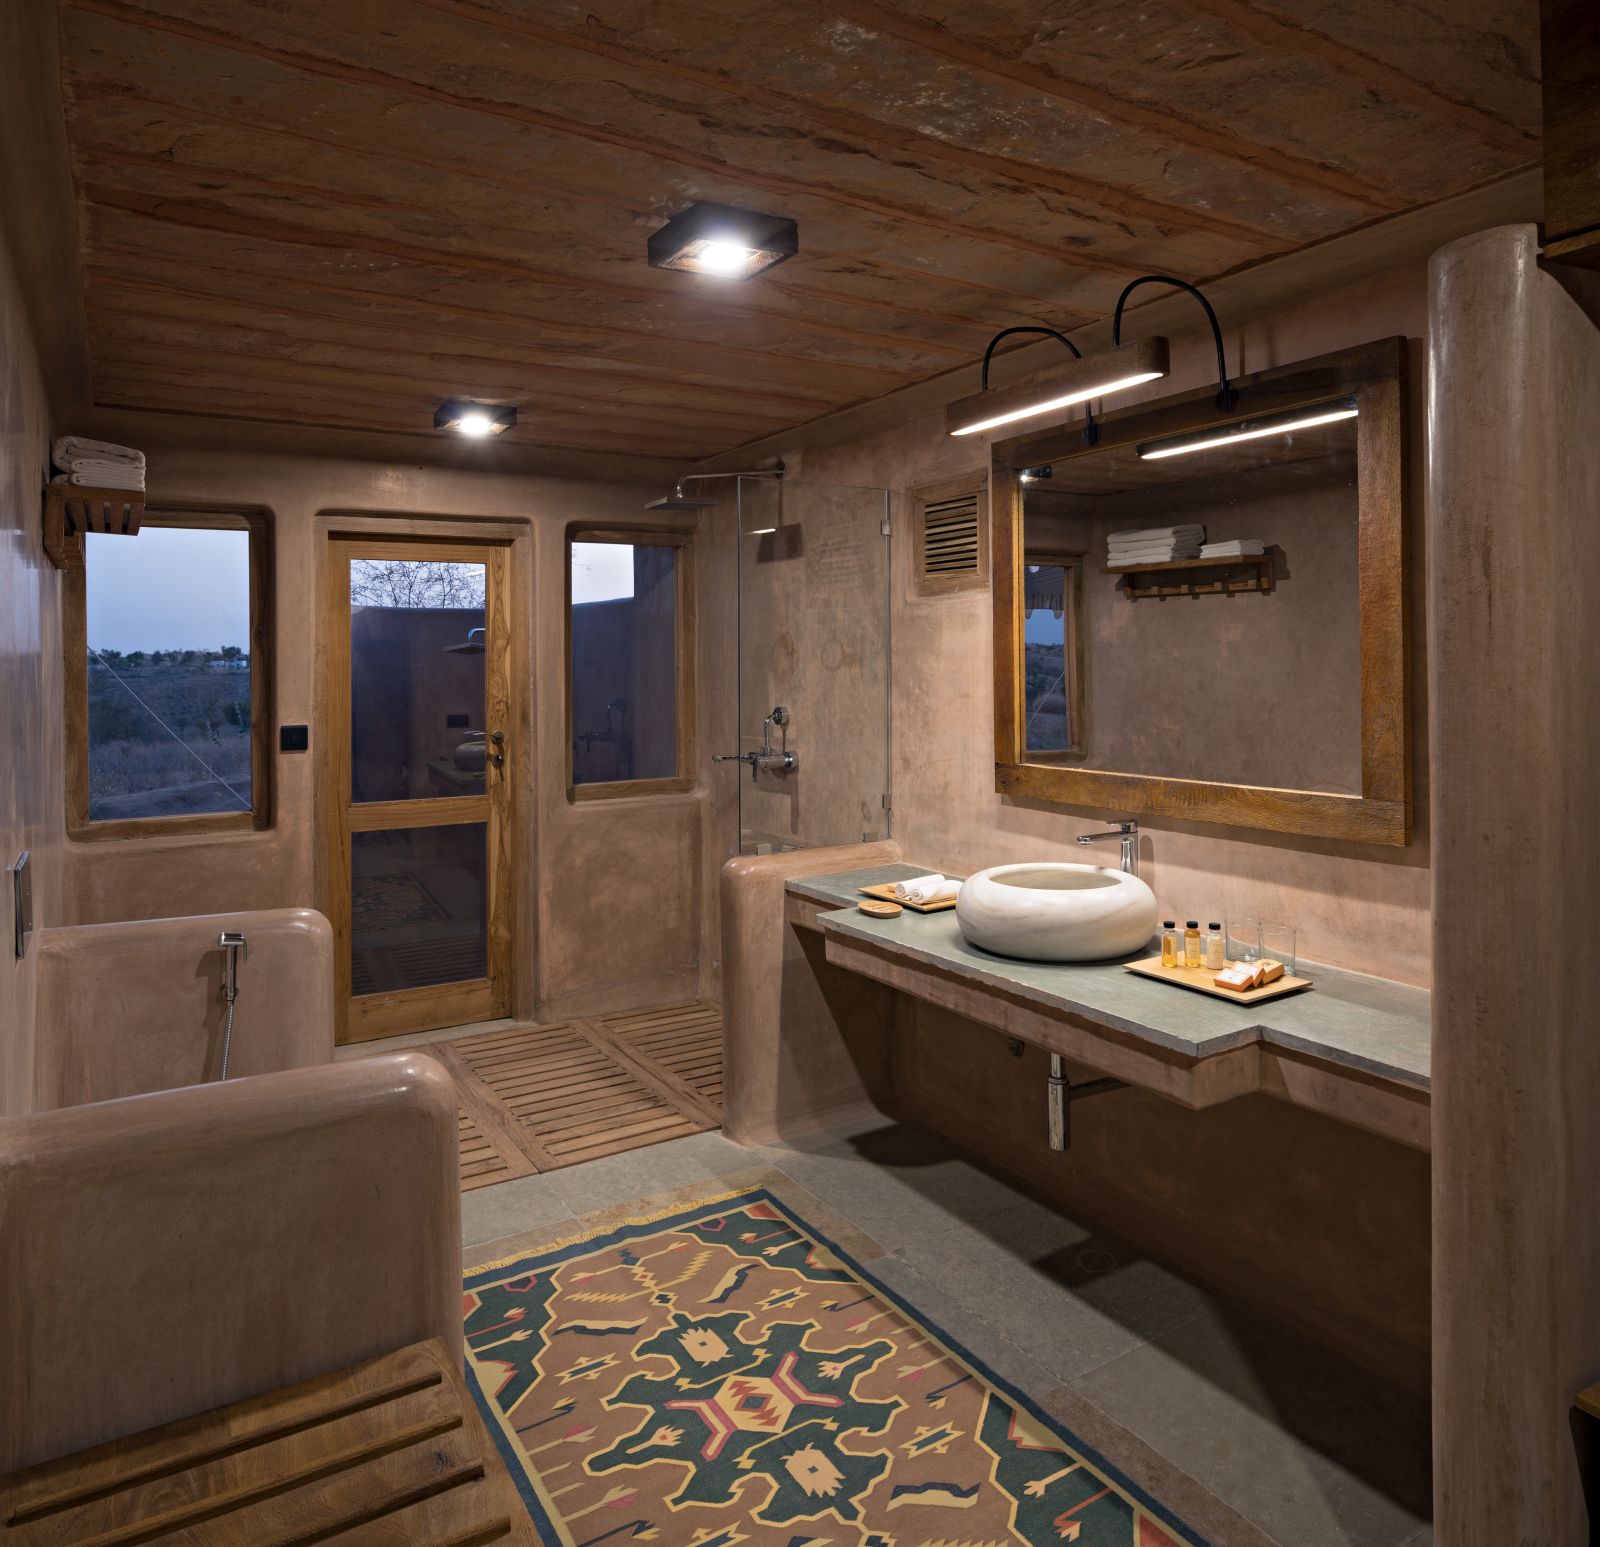 Washroom of the luxury tents at the Manvar Resort and Desert Camp